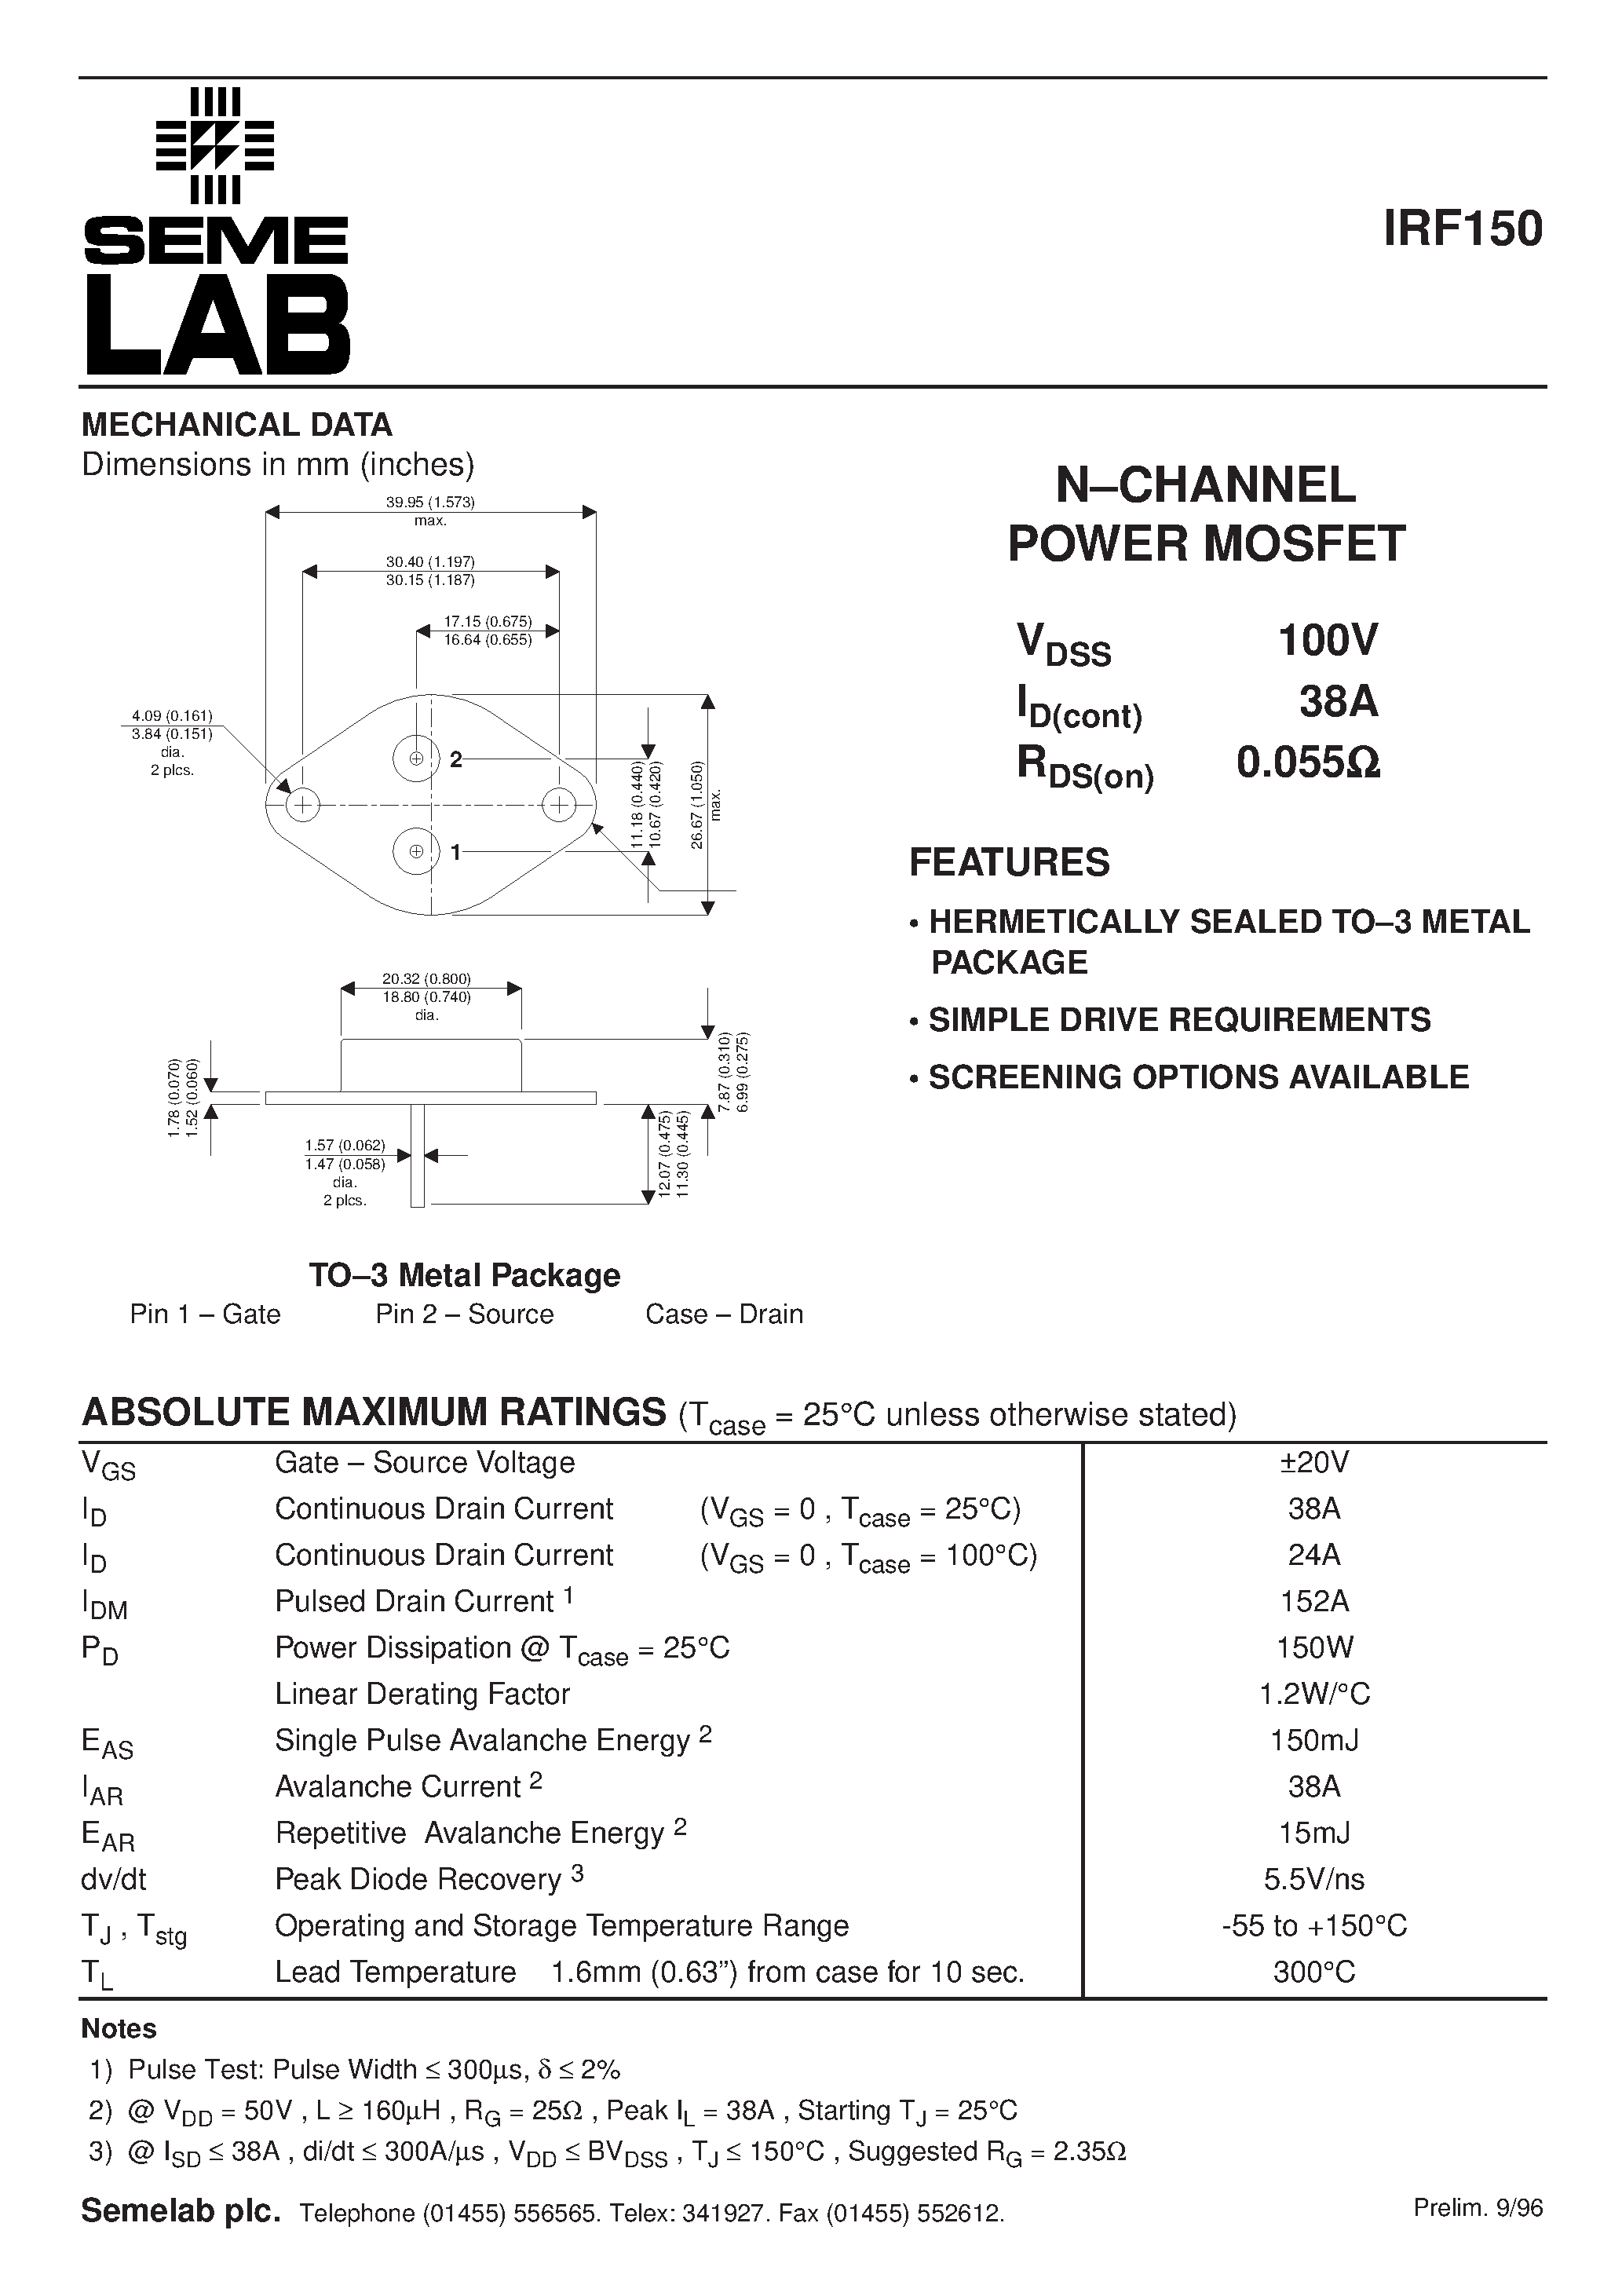 Datasheet IRF150 - N-CHANNEL POWER MOSFET page 1